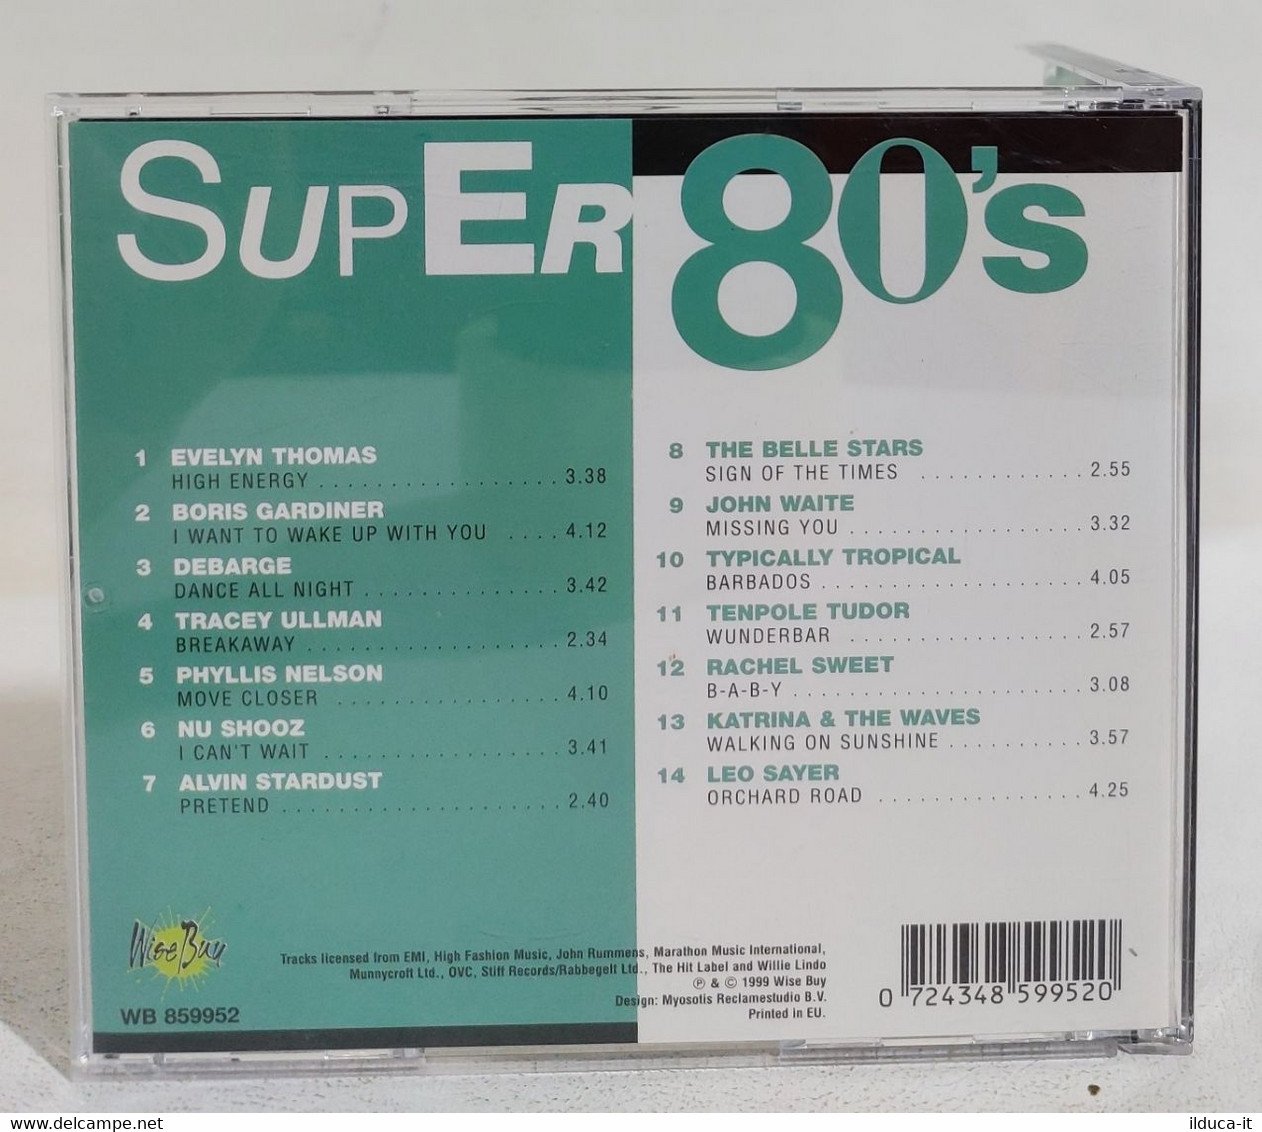 I108451 CD - Super 80's - Wise Buy 1999 - Hit-Compilations